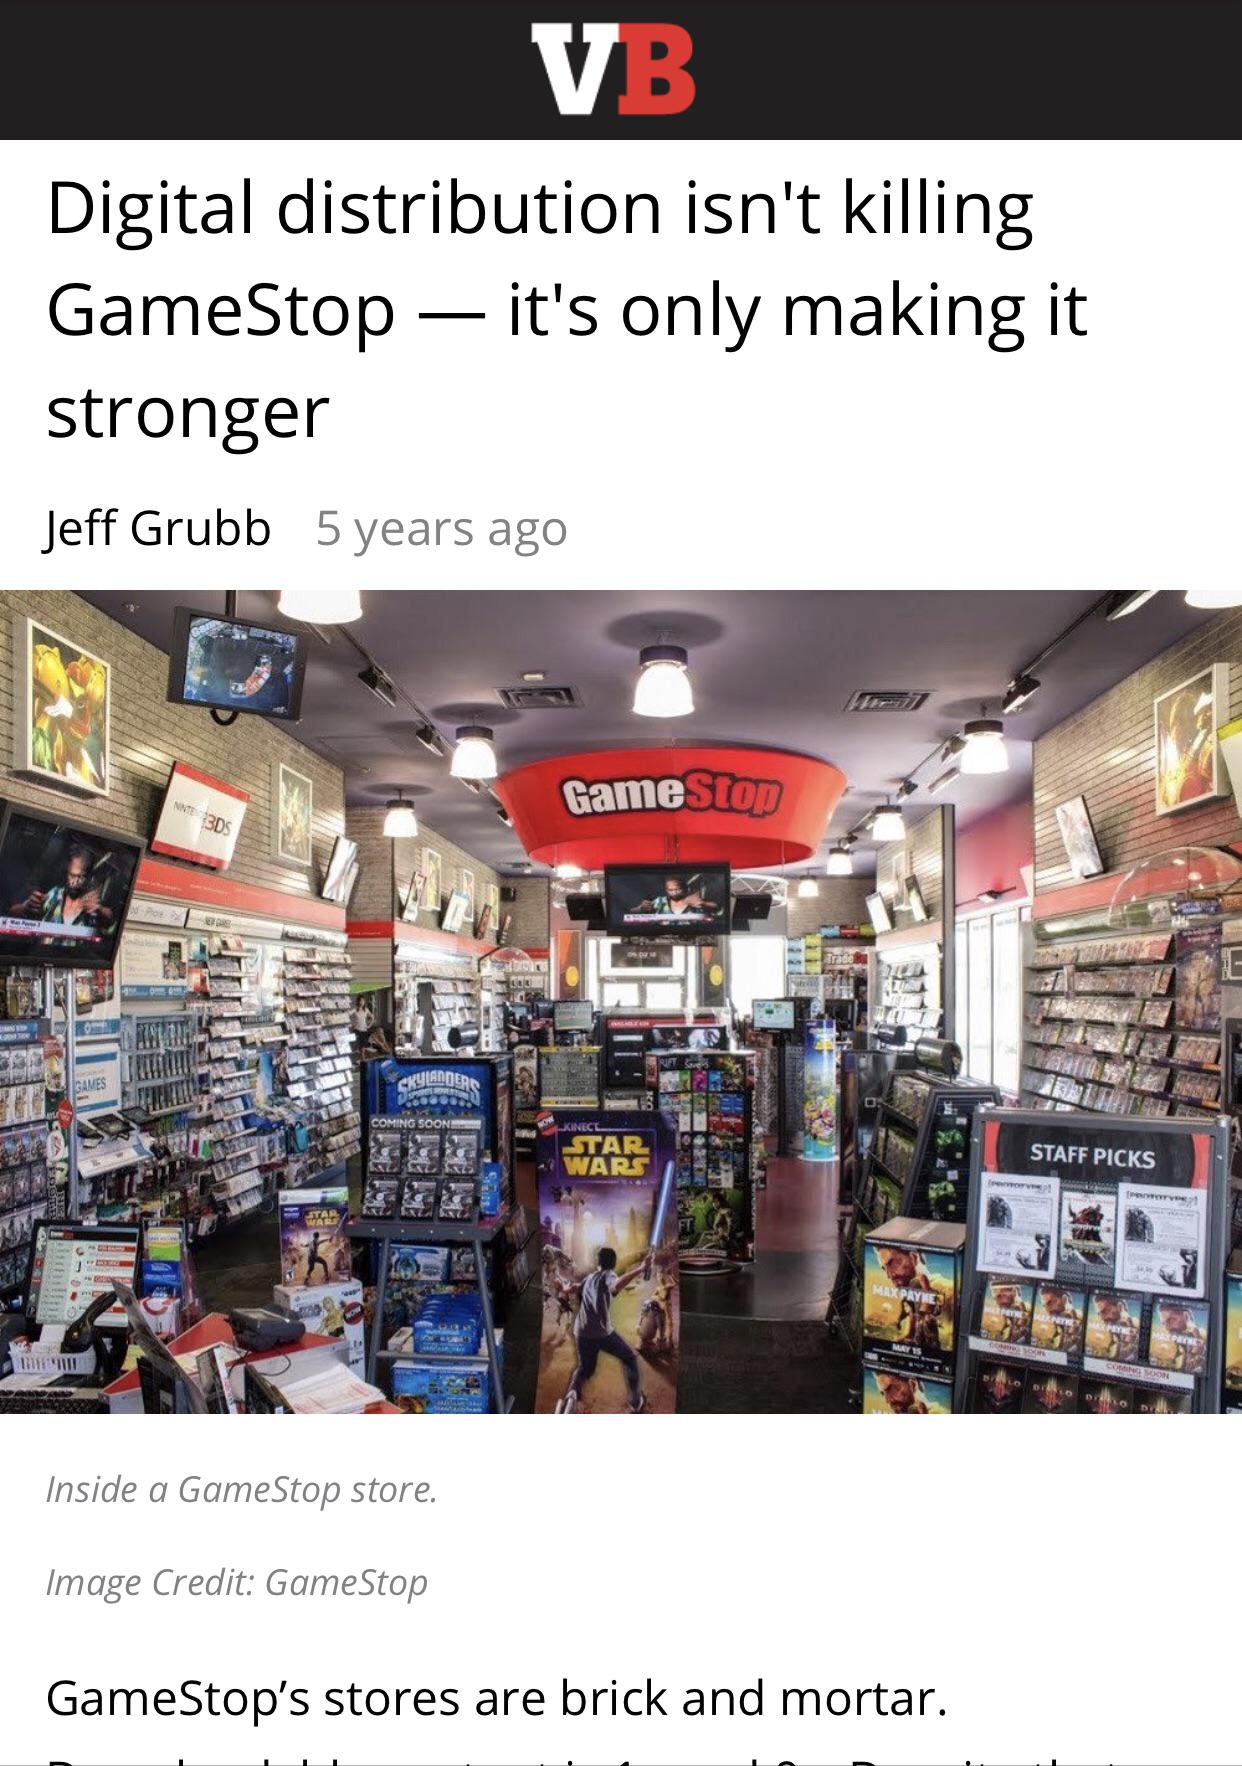 inside gamestop - Digital distribution isn't killing GameStop it's only making it stronger Jeff Grubb 5 years ago Game Stop NNTE3DS Undern Games Coming Soon Kinecl Star Wars Staff Picks Inside a GameStop store. Image Credit GameStop GameStop's stores are 